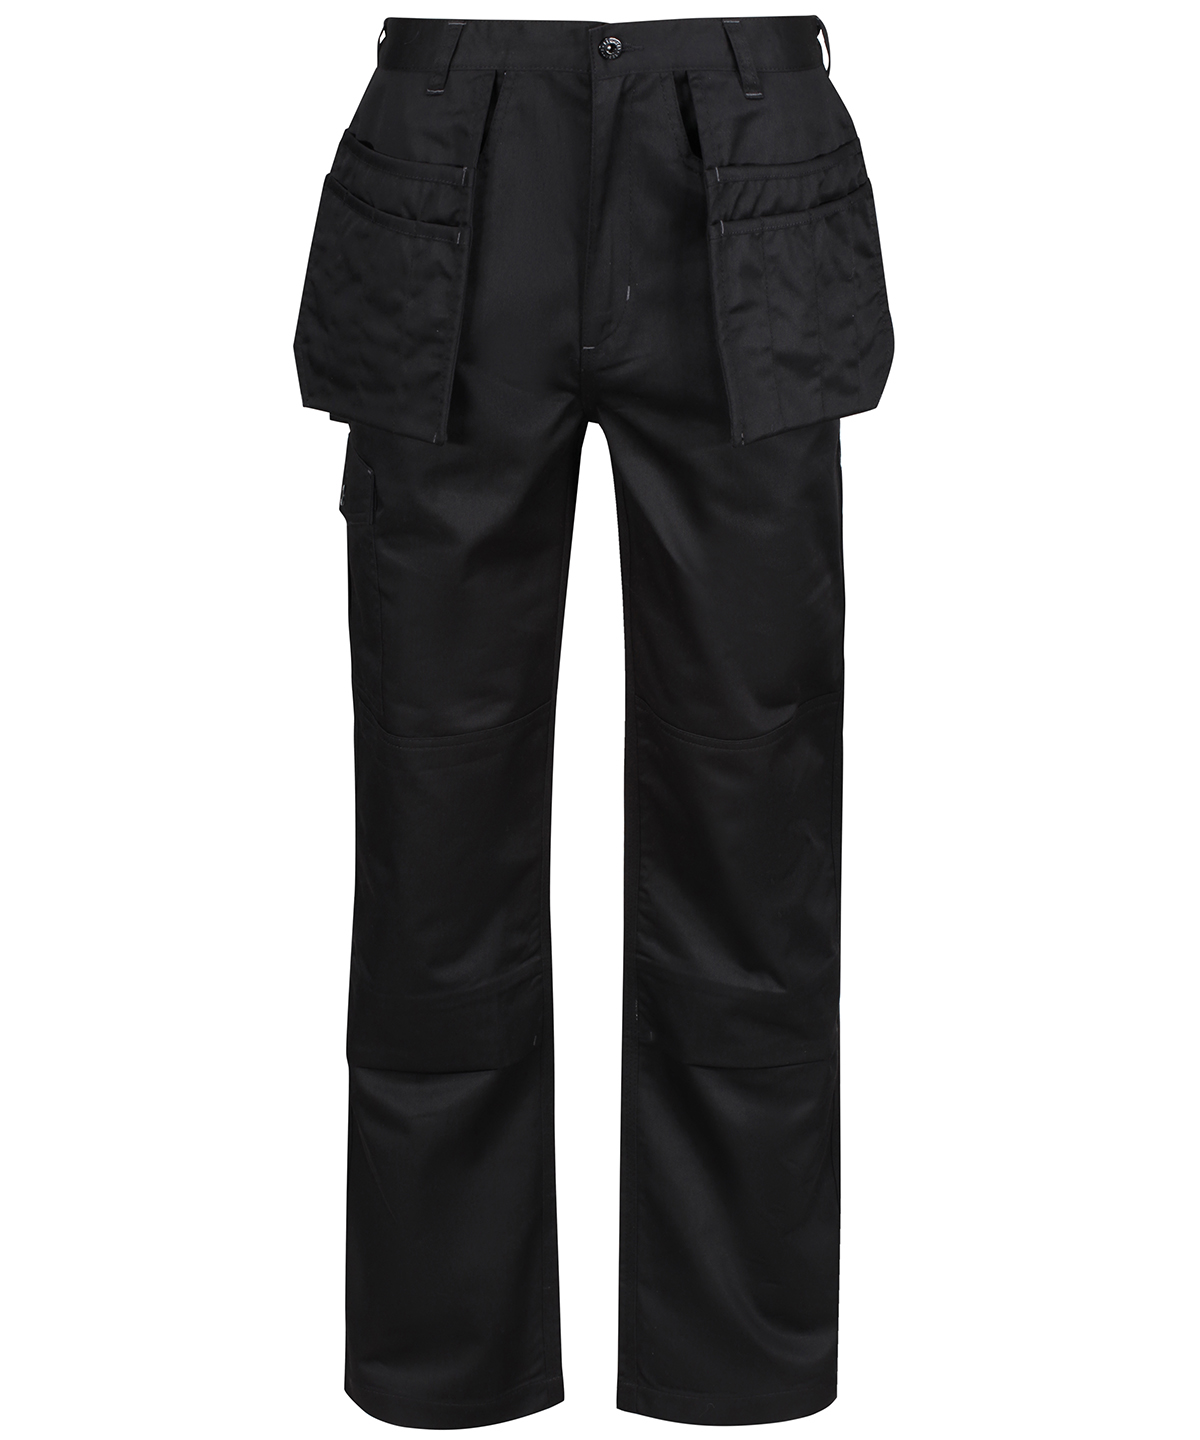 Pro cargo holster trousers